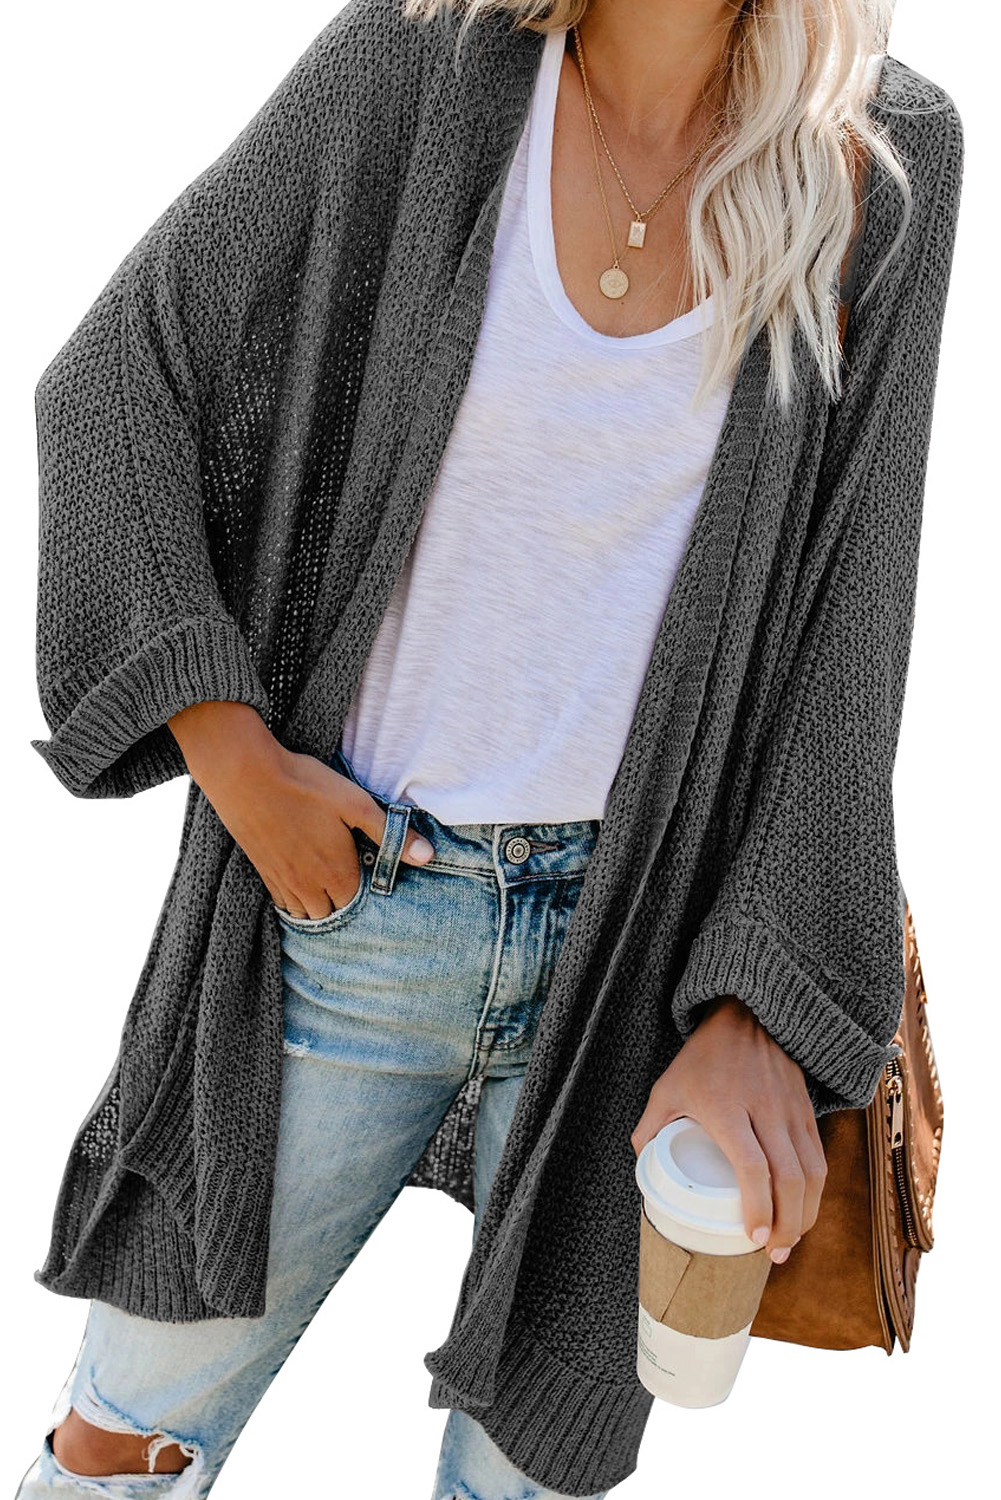 Gray Knit Cardigan - Passion of Essence Boutique